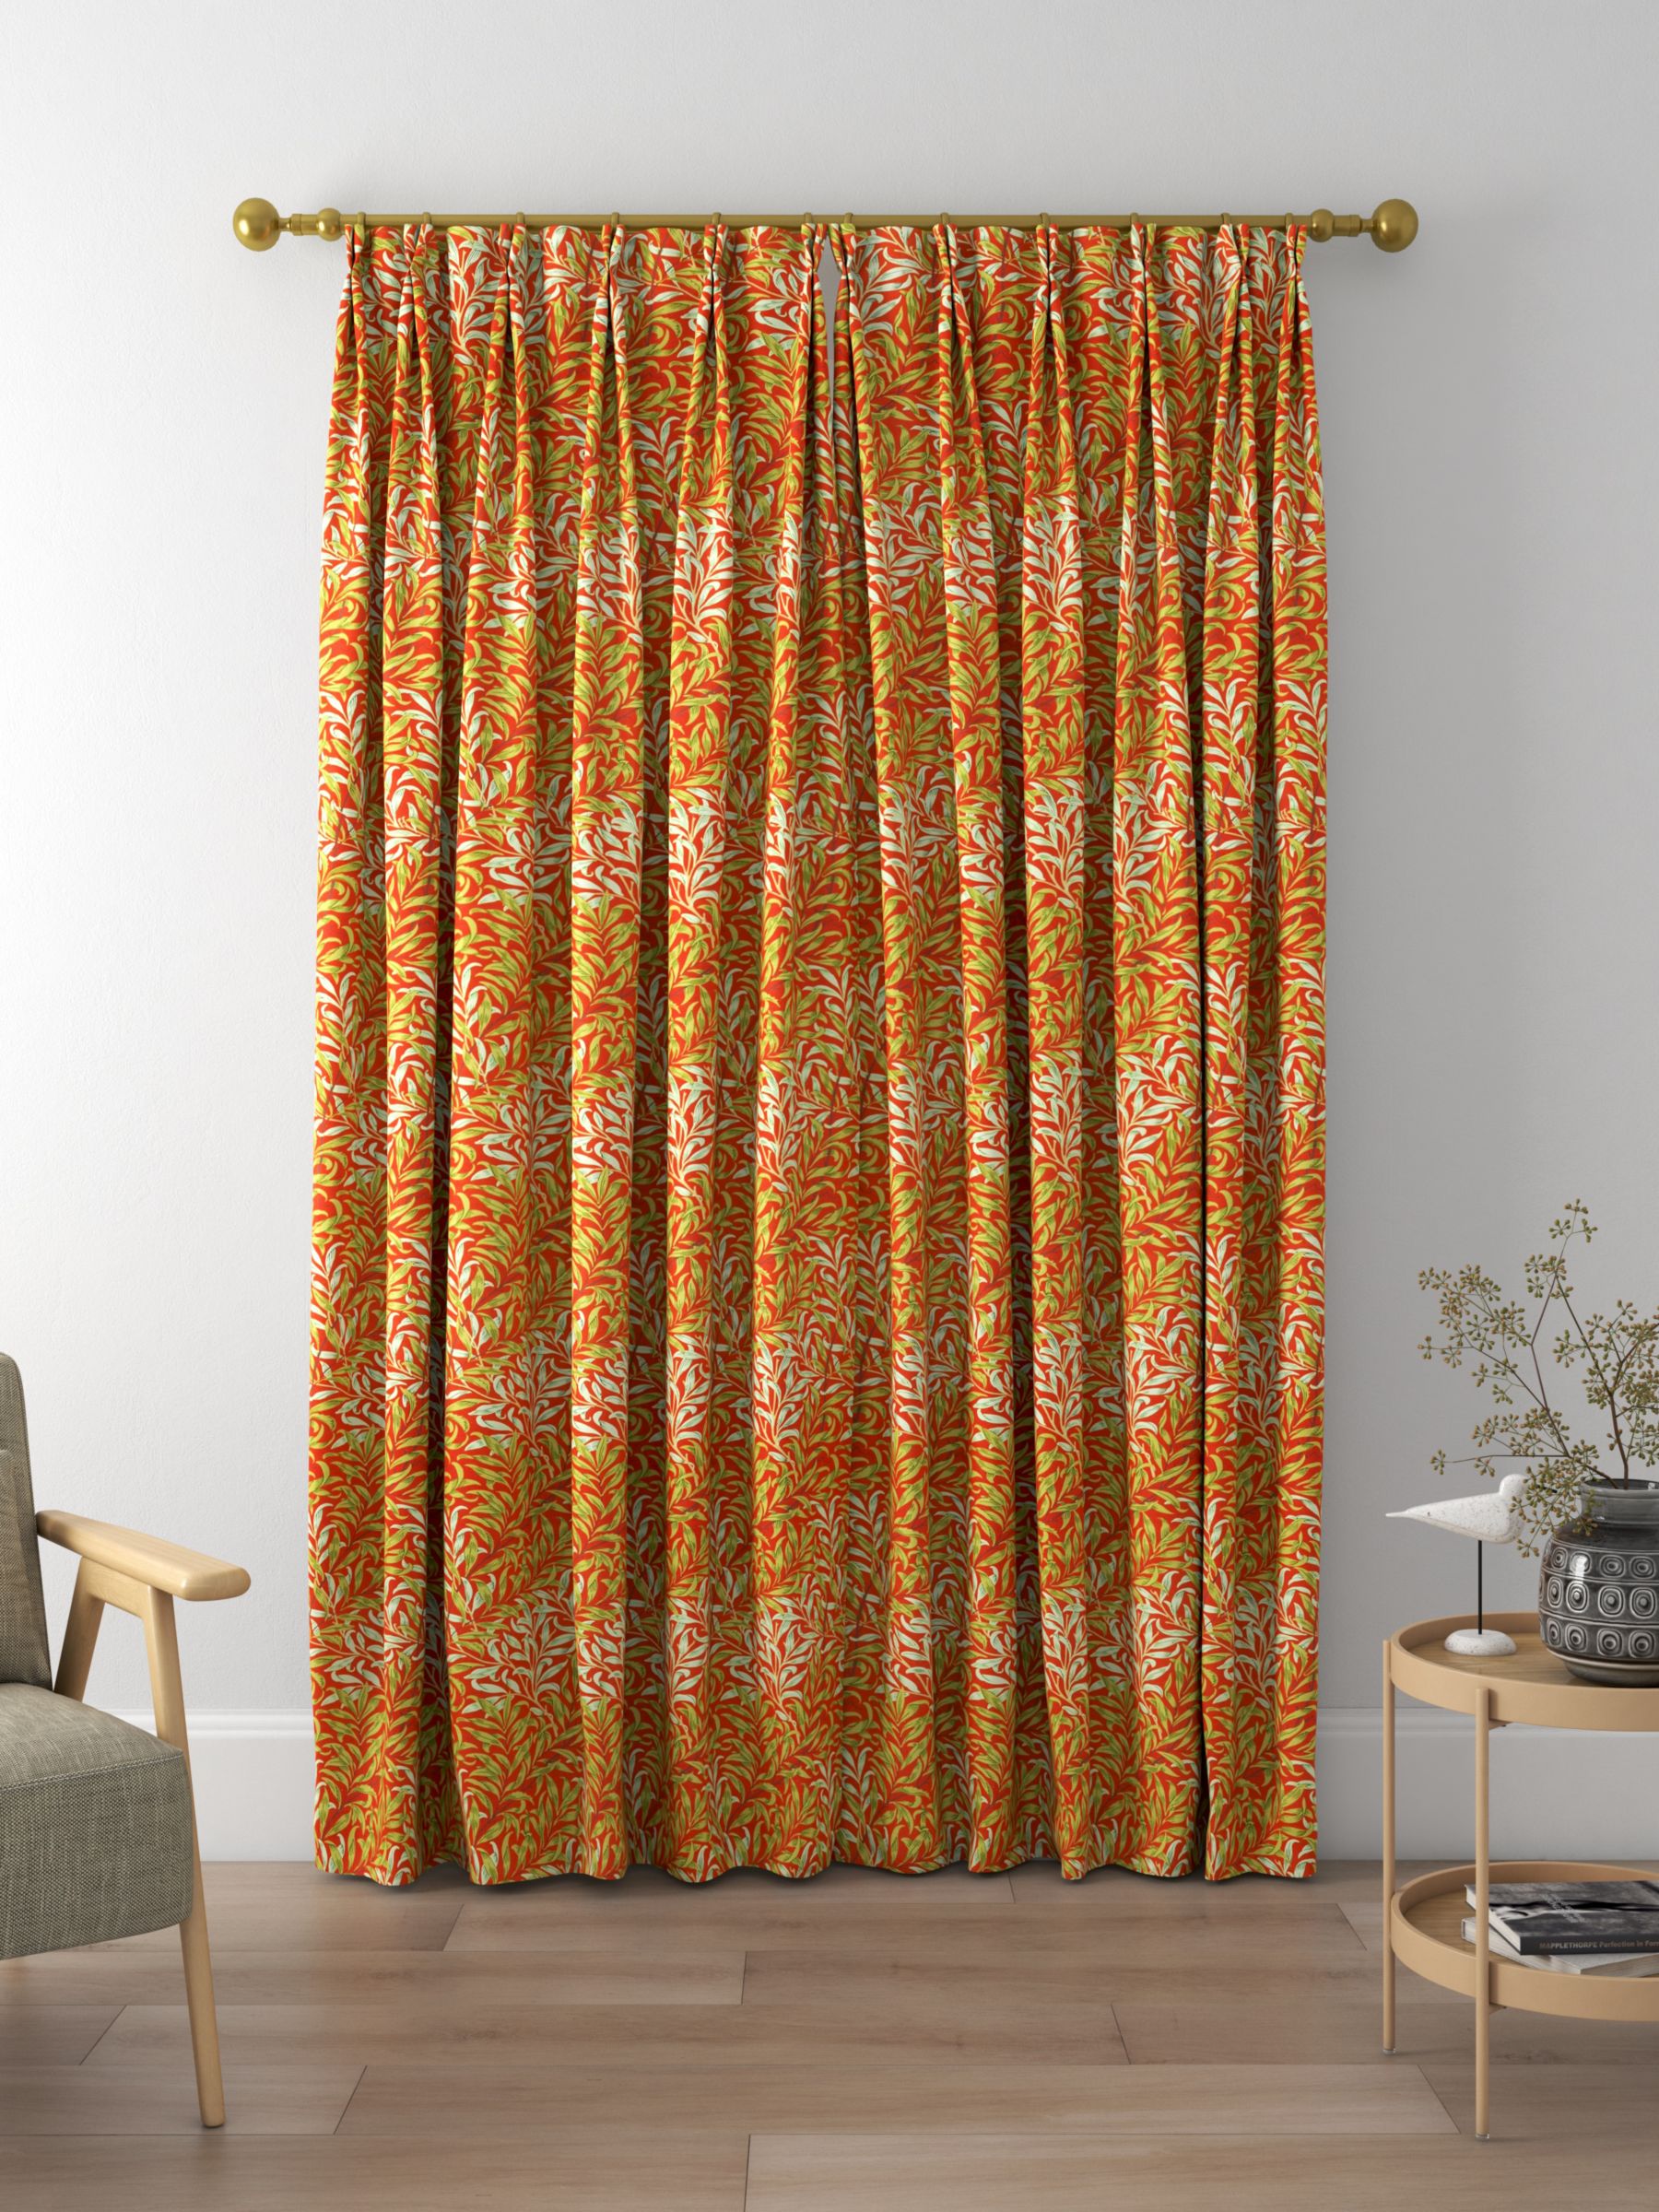 Morris & Co. Willow Boughs Made to Measure Curtains, Tomato/Olive